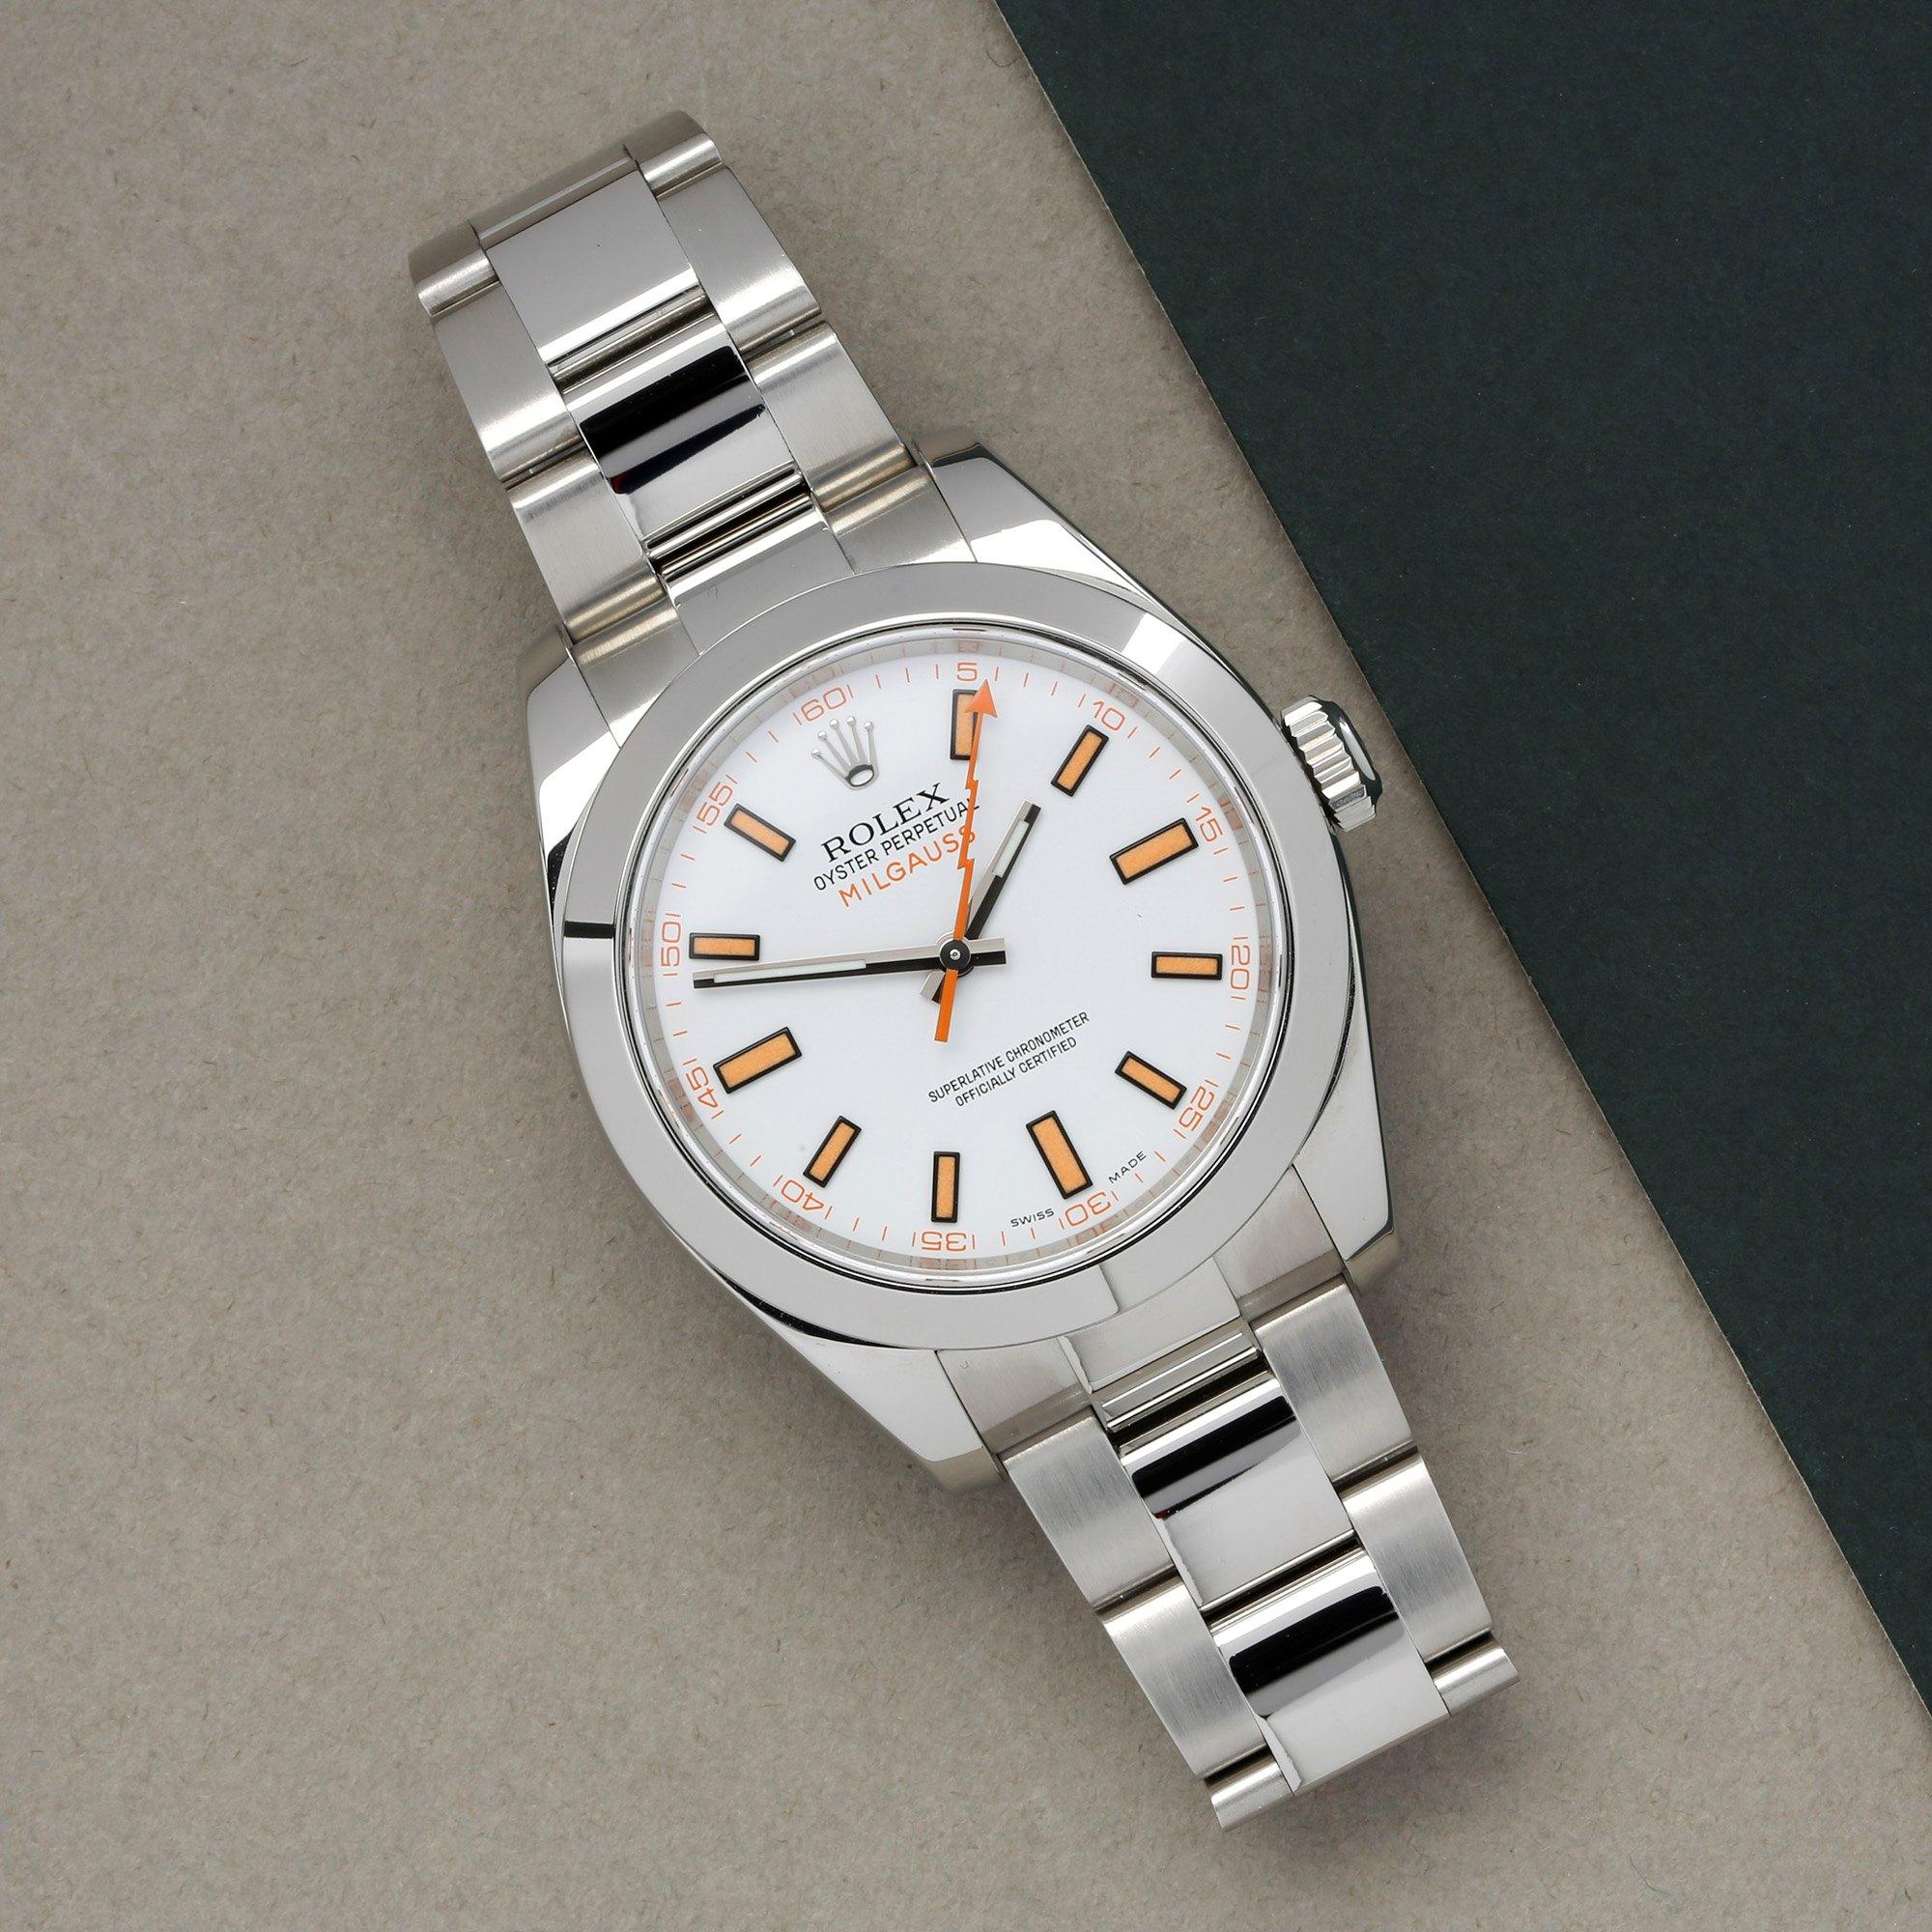 Xupes Reference: W007953
Manufacturer: Rolex
Model: Milgauss
Model Variant: 0
Model Number: 116400
Age: 42685
Gender: Men
Complete With: Rolex Box, Manuals, Card Holder, Swing Tag & Guarantee
Dial: White Baton
Glass: Sapphire Crystal
Case Size: